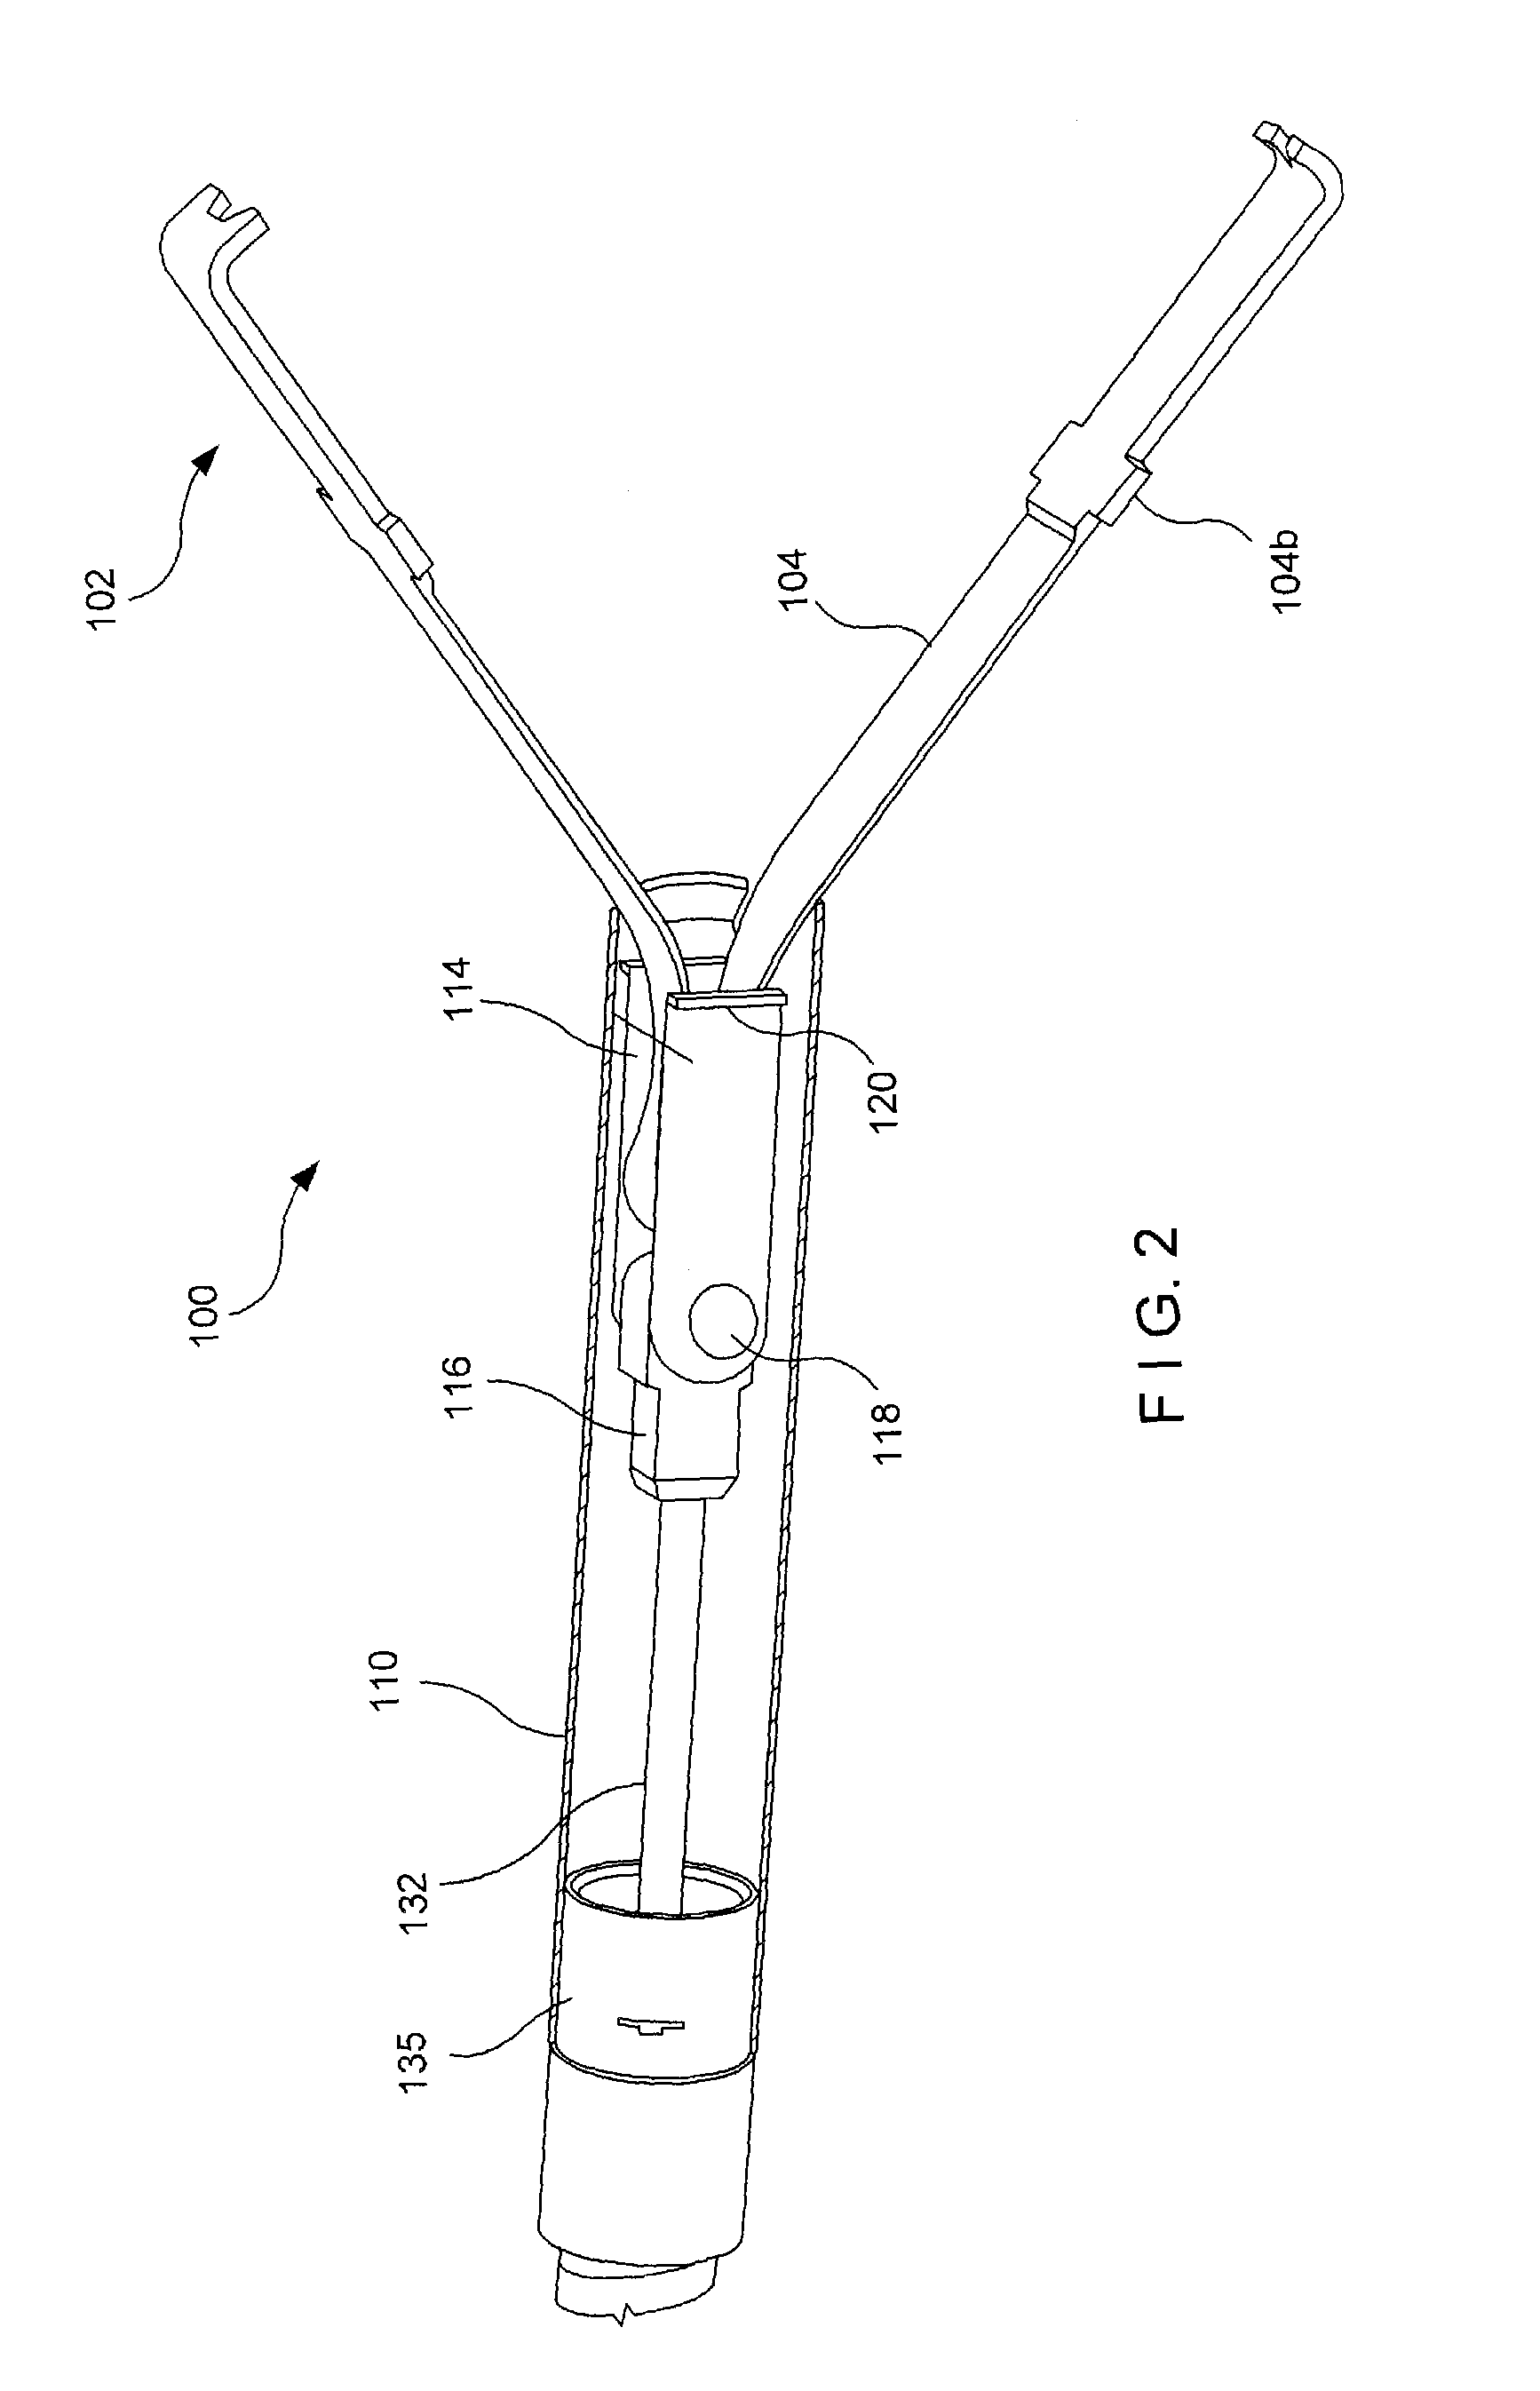 Hemostatic clipping devices and methods